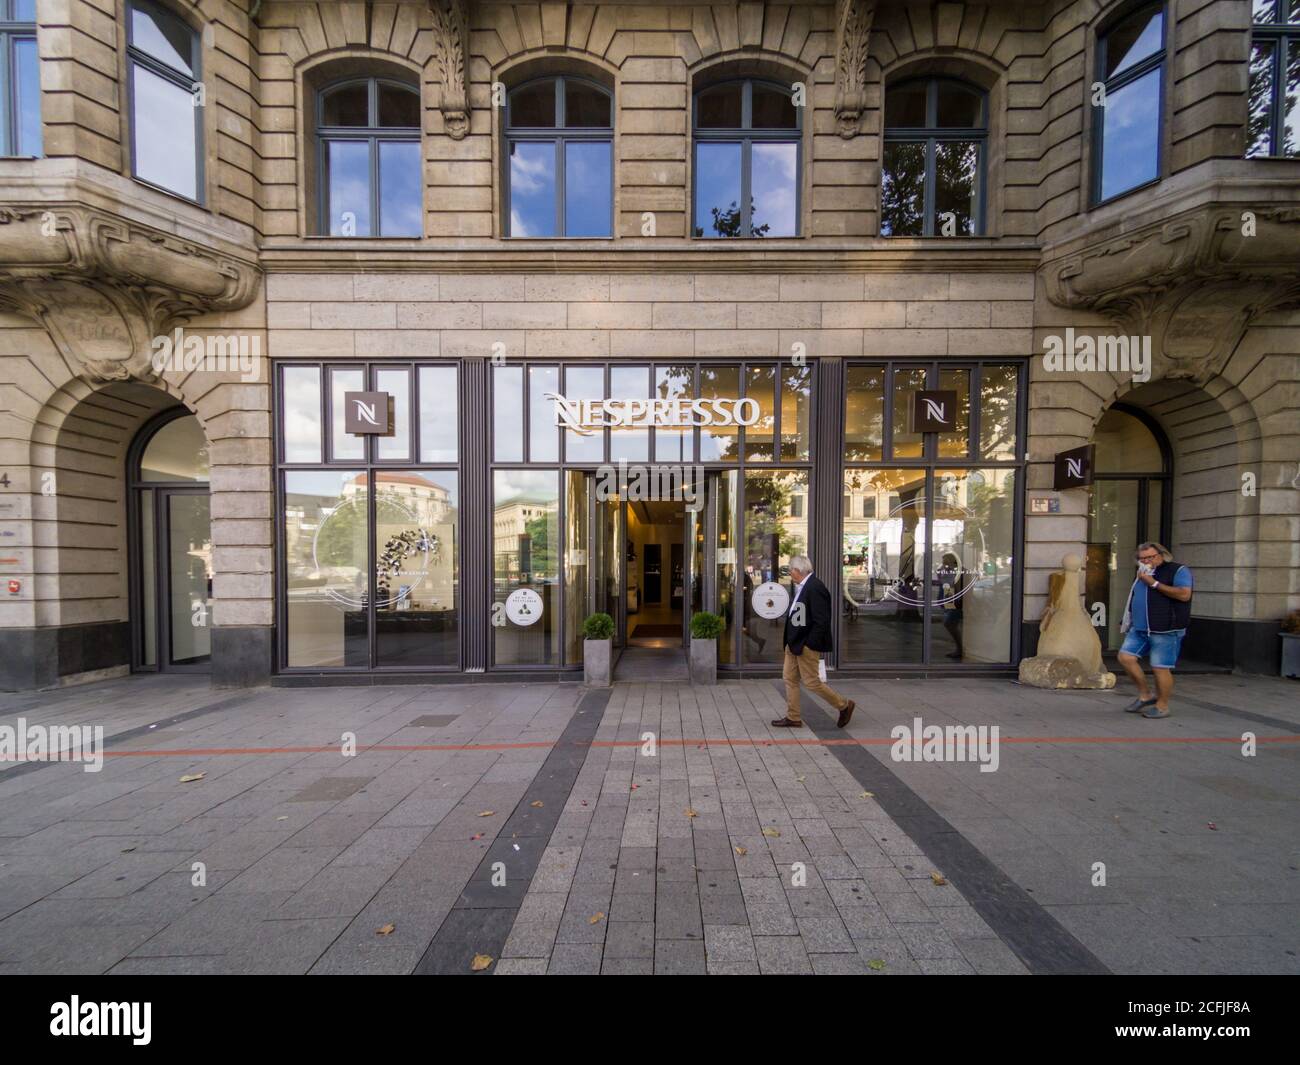 tyk tyve Cordelia Nespresso shop store front outside Mall In Hannover, Germany, Nespresso is  a famous brand of coffee pads and coffee machines Stock Photo - Alamy